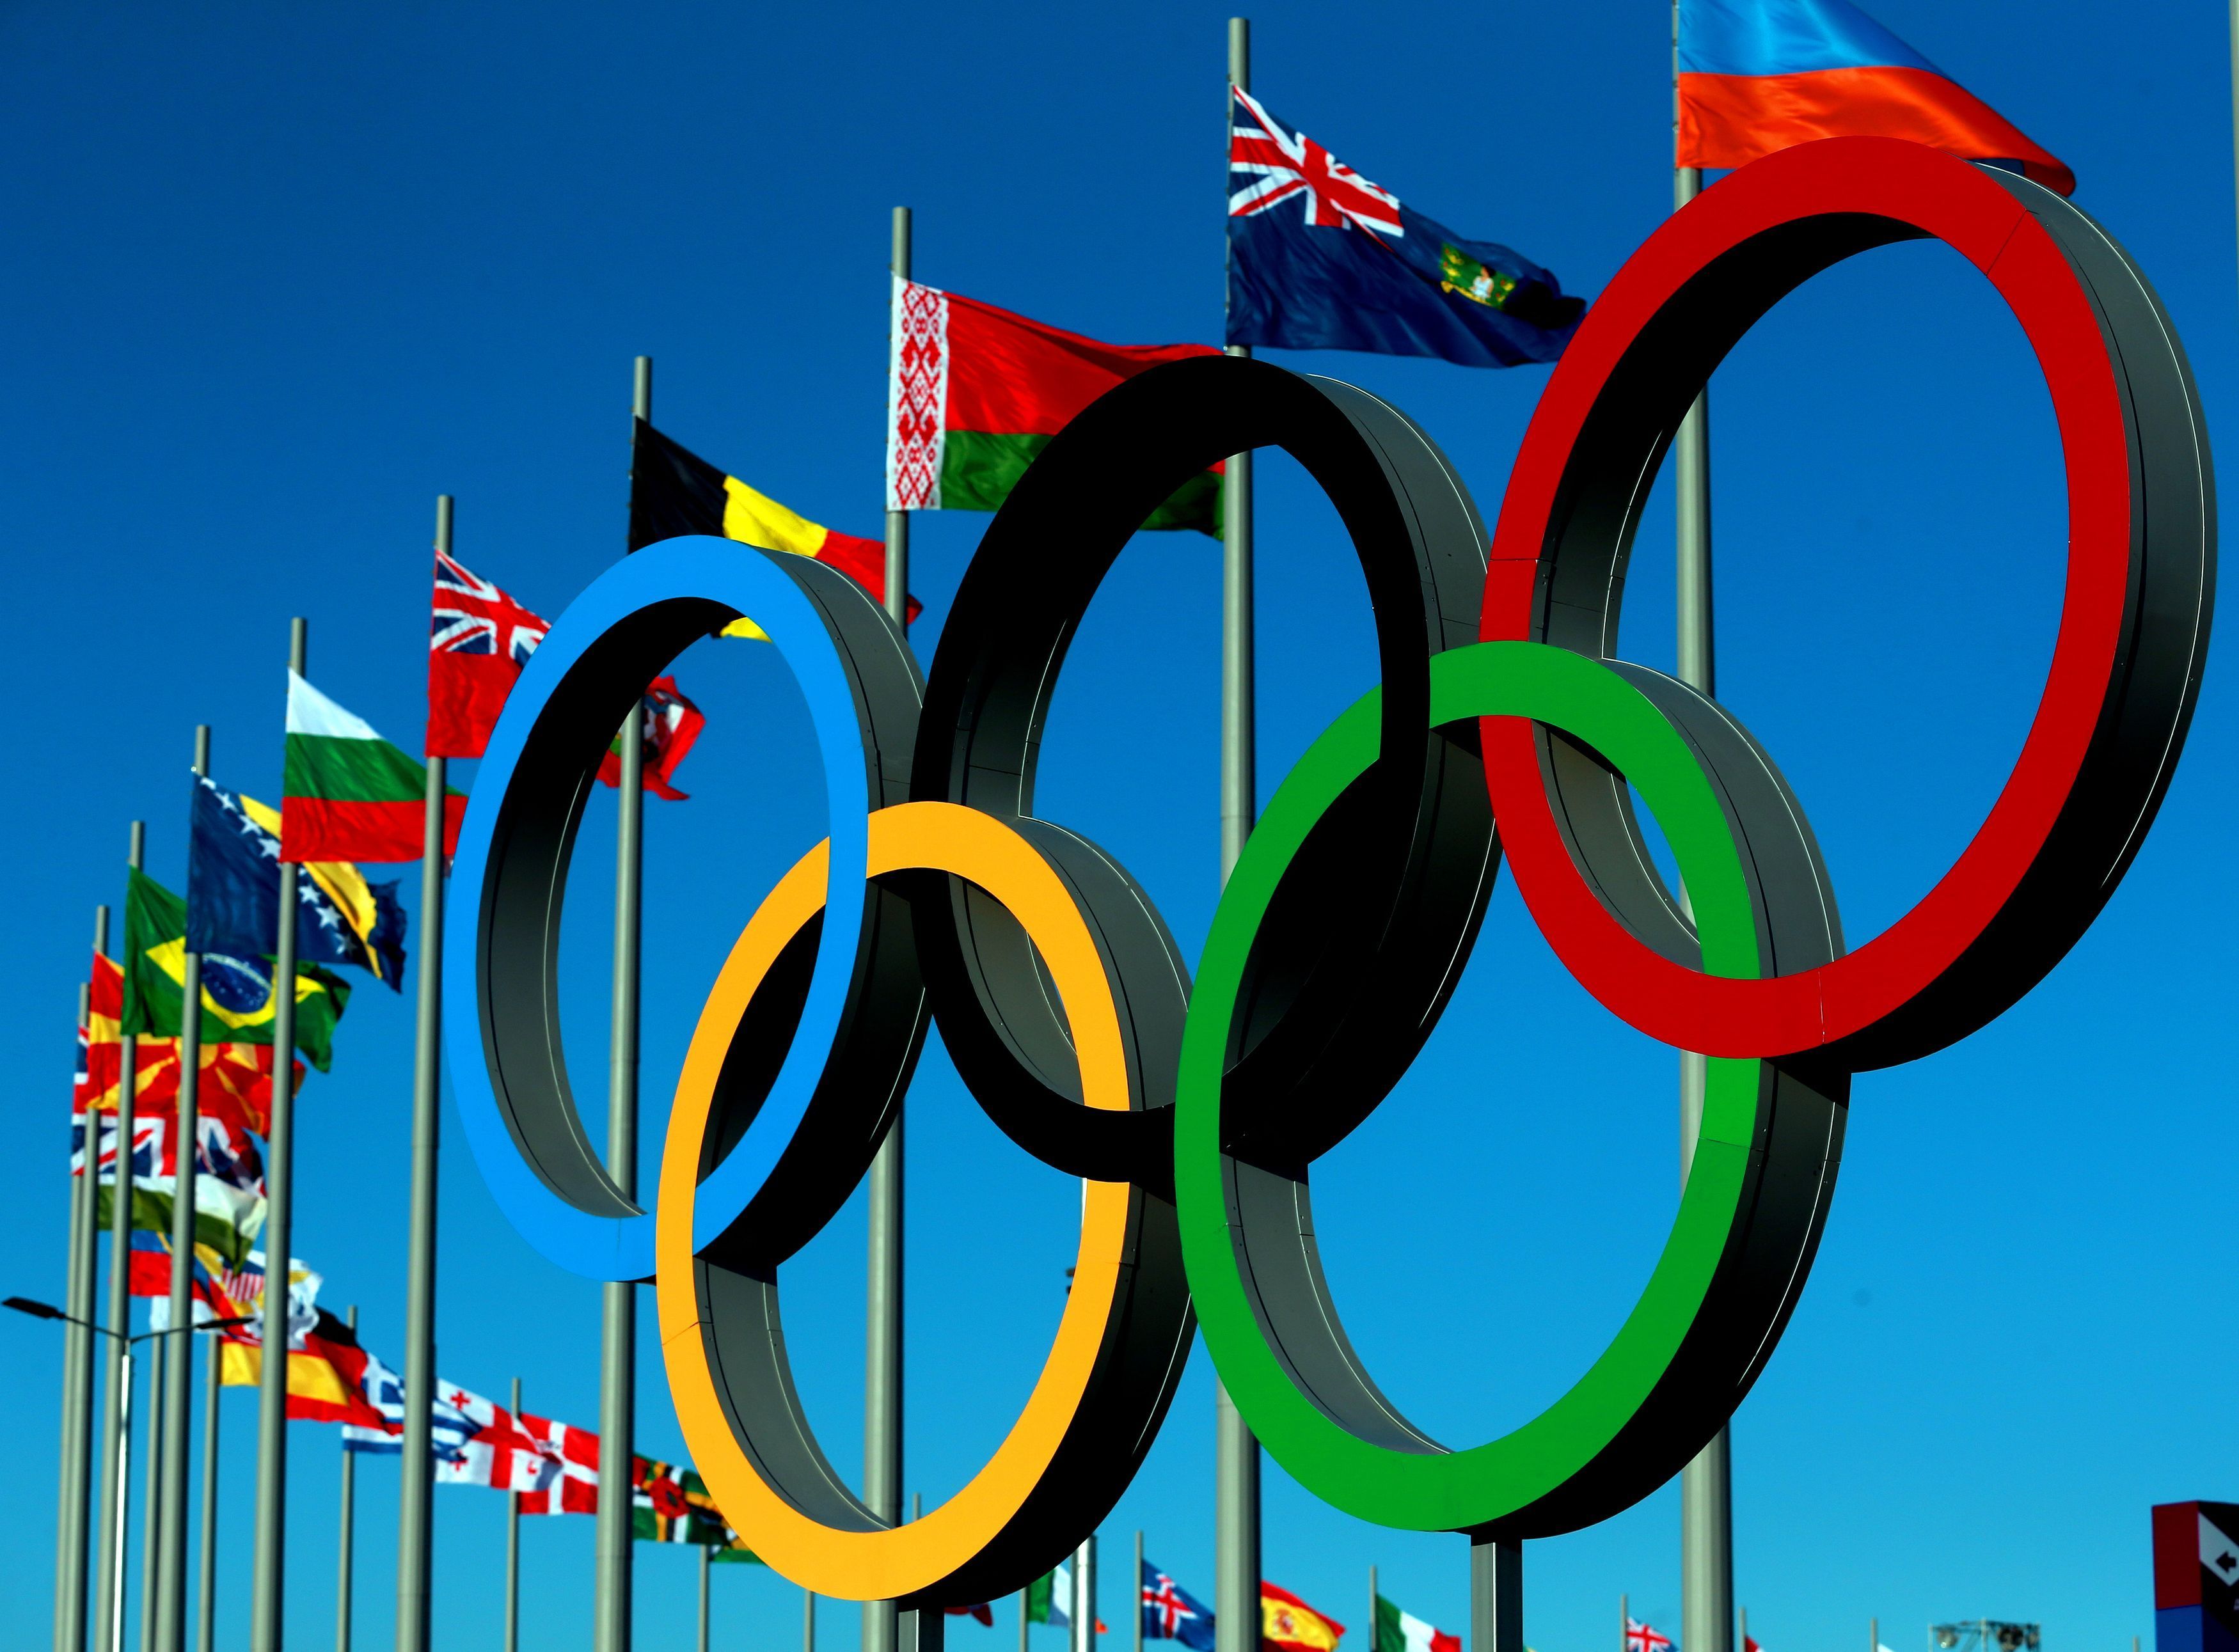 What do the Olympic rings represent? - Quora